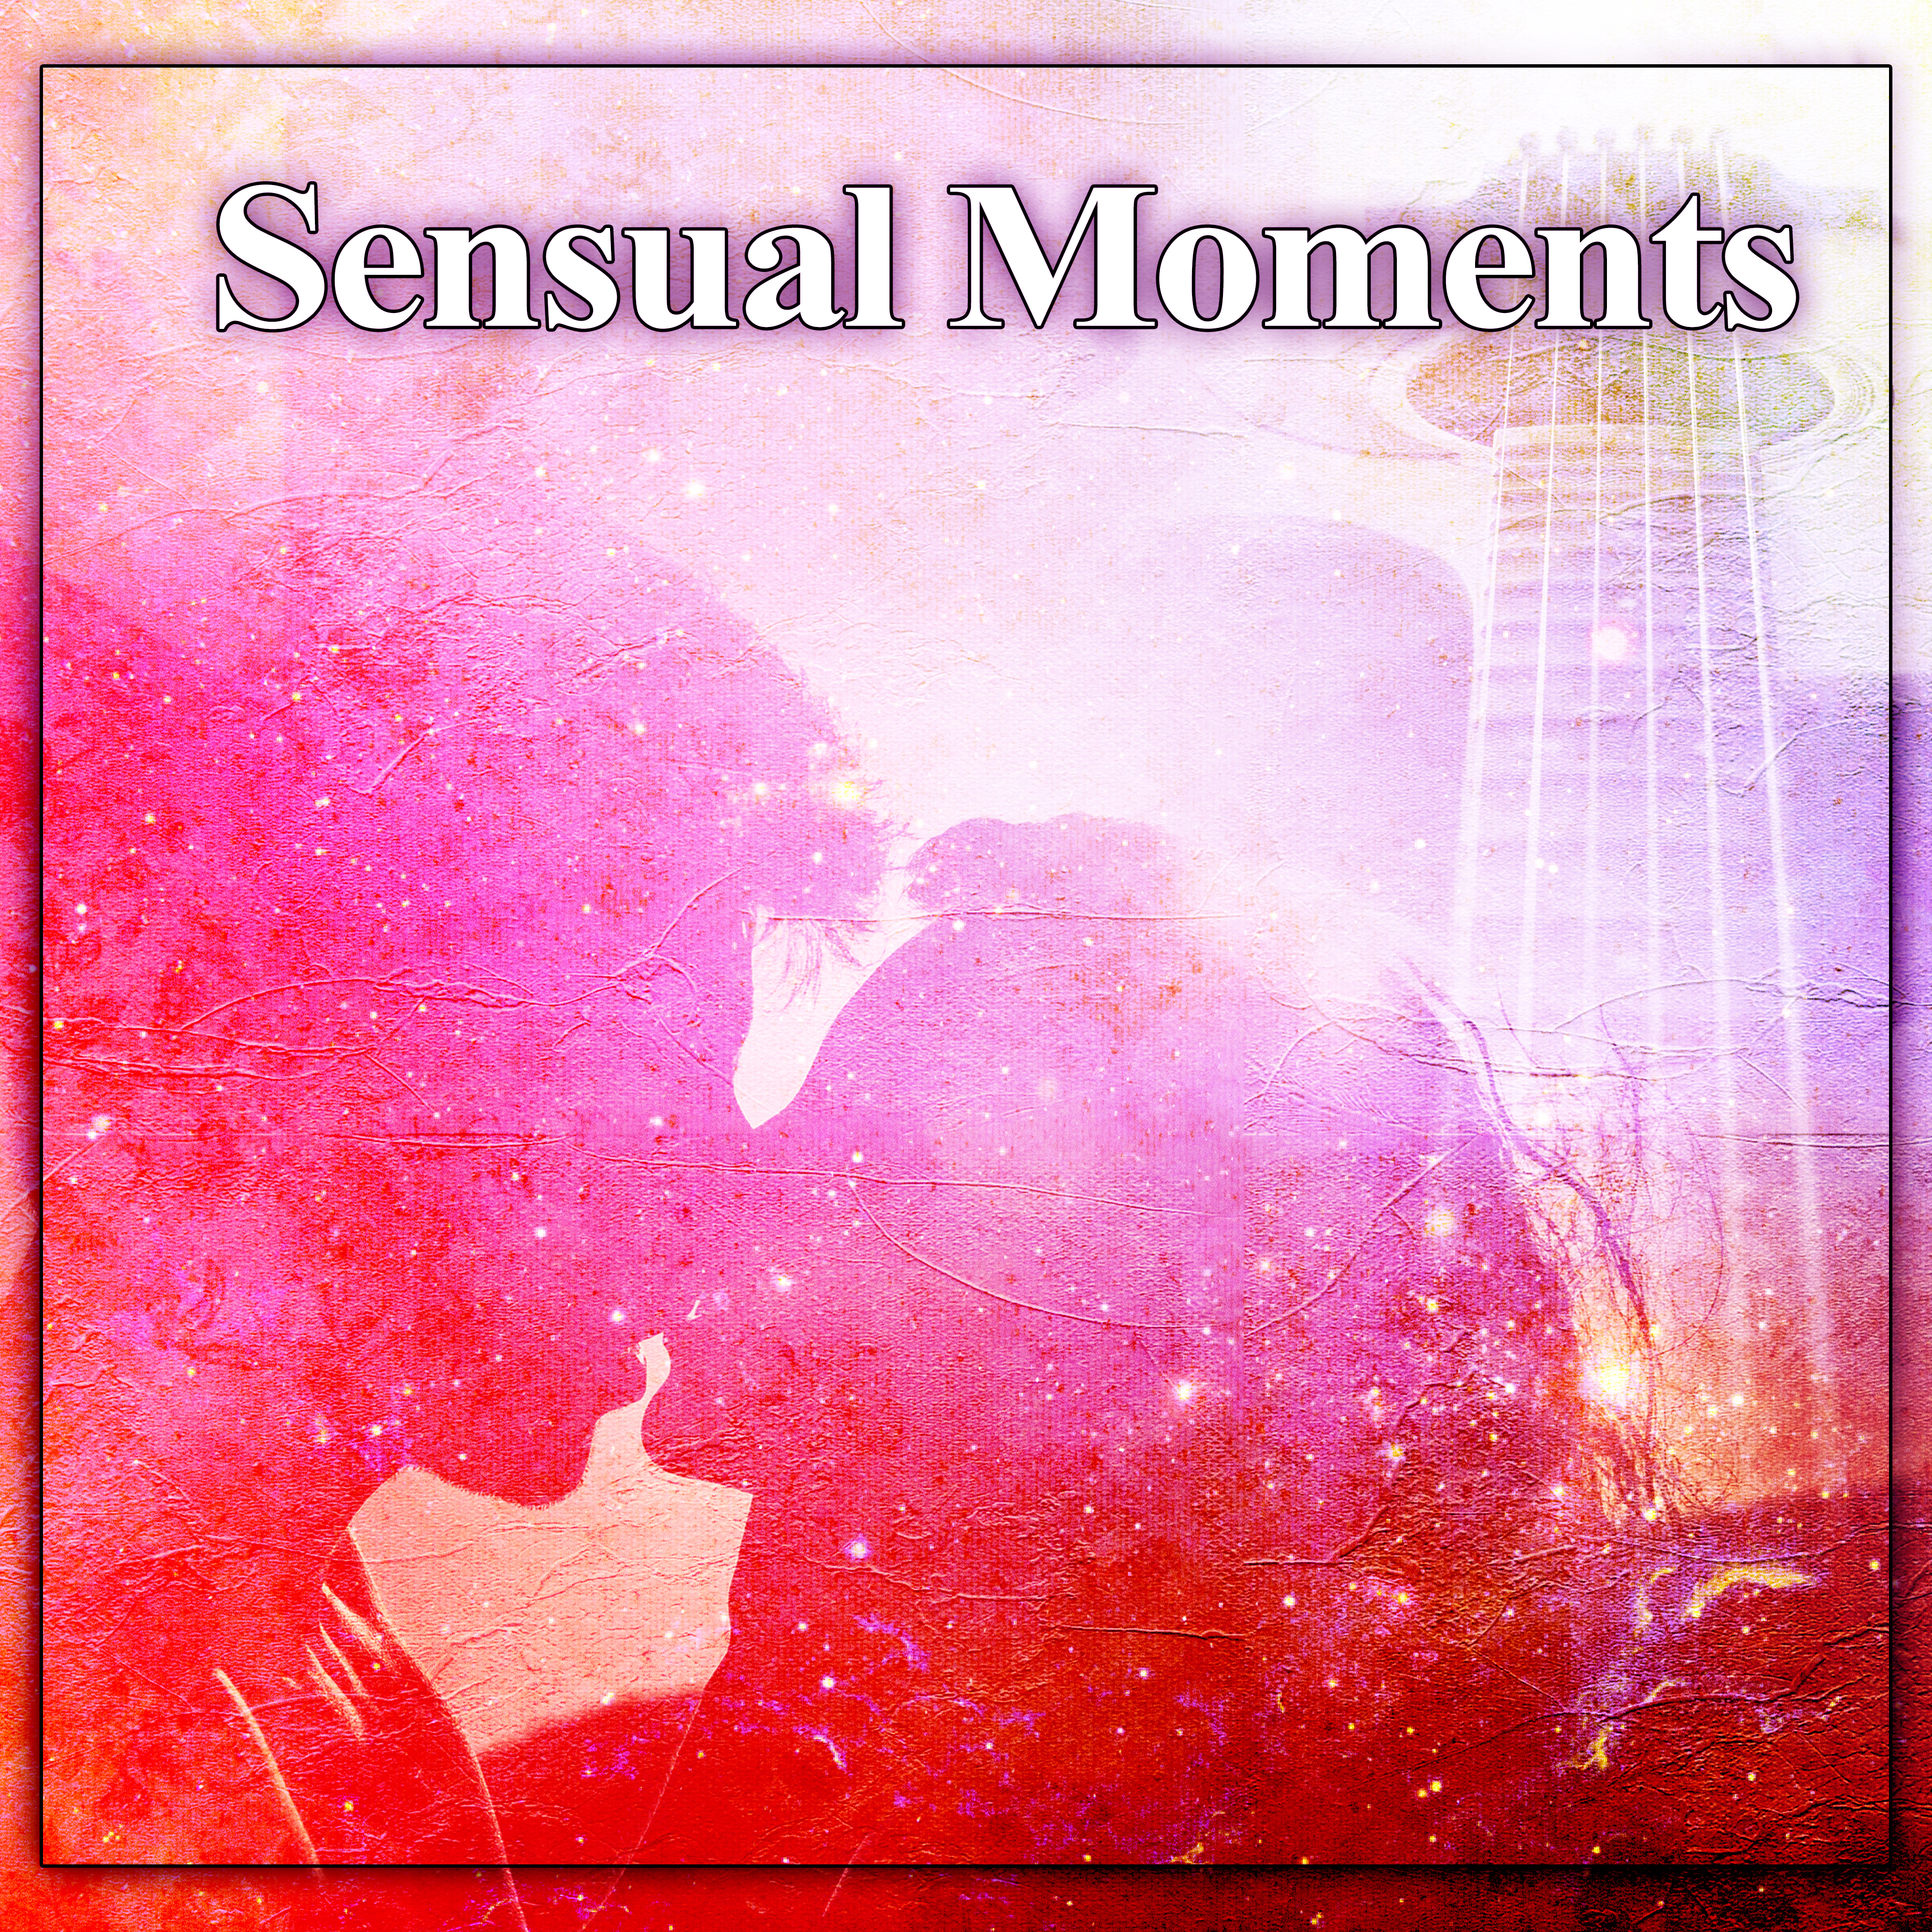 Sensual Moments  Romantic Sounds of Saxophone Music, Erotic Music for Making Love, Romantic Jazz